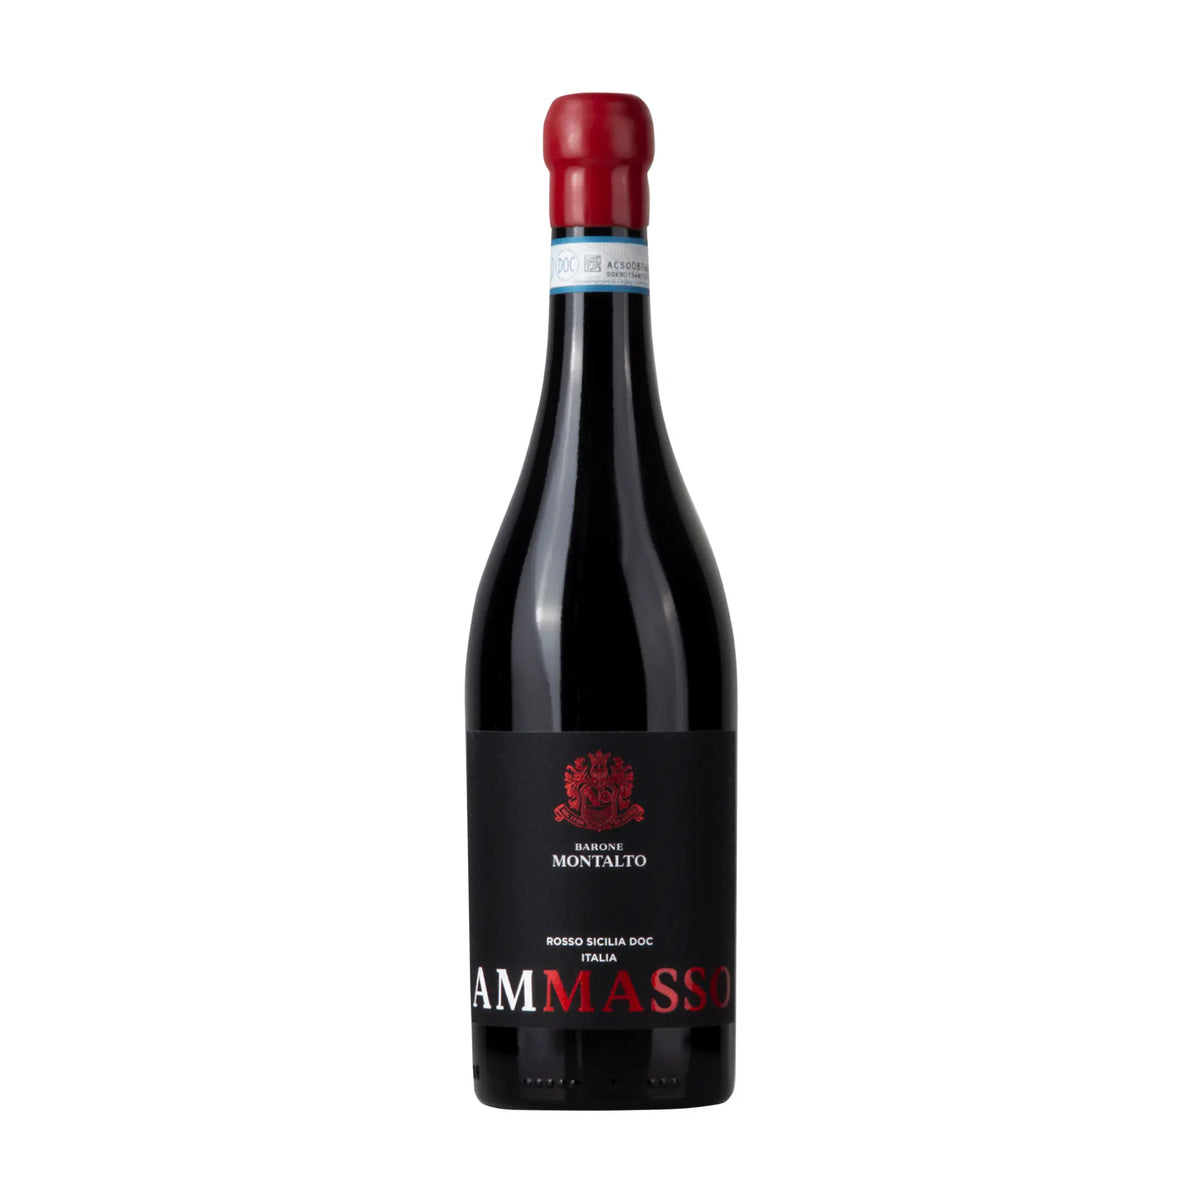 Barone Montalto-Rotwein-Cuvée-Sizilien-Italien-Ammasso Rosso Sic. DOC Geschenkpackung-WINECOM